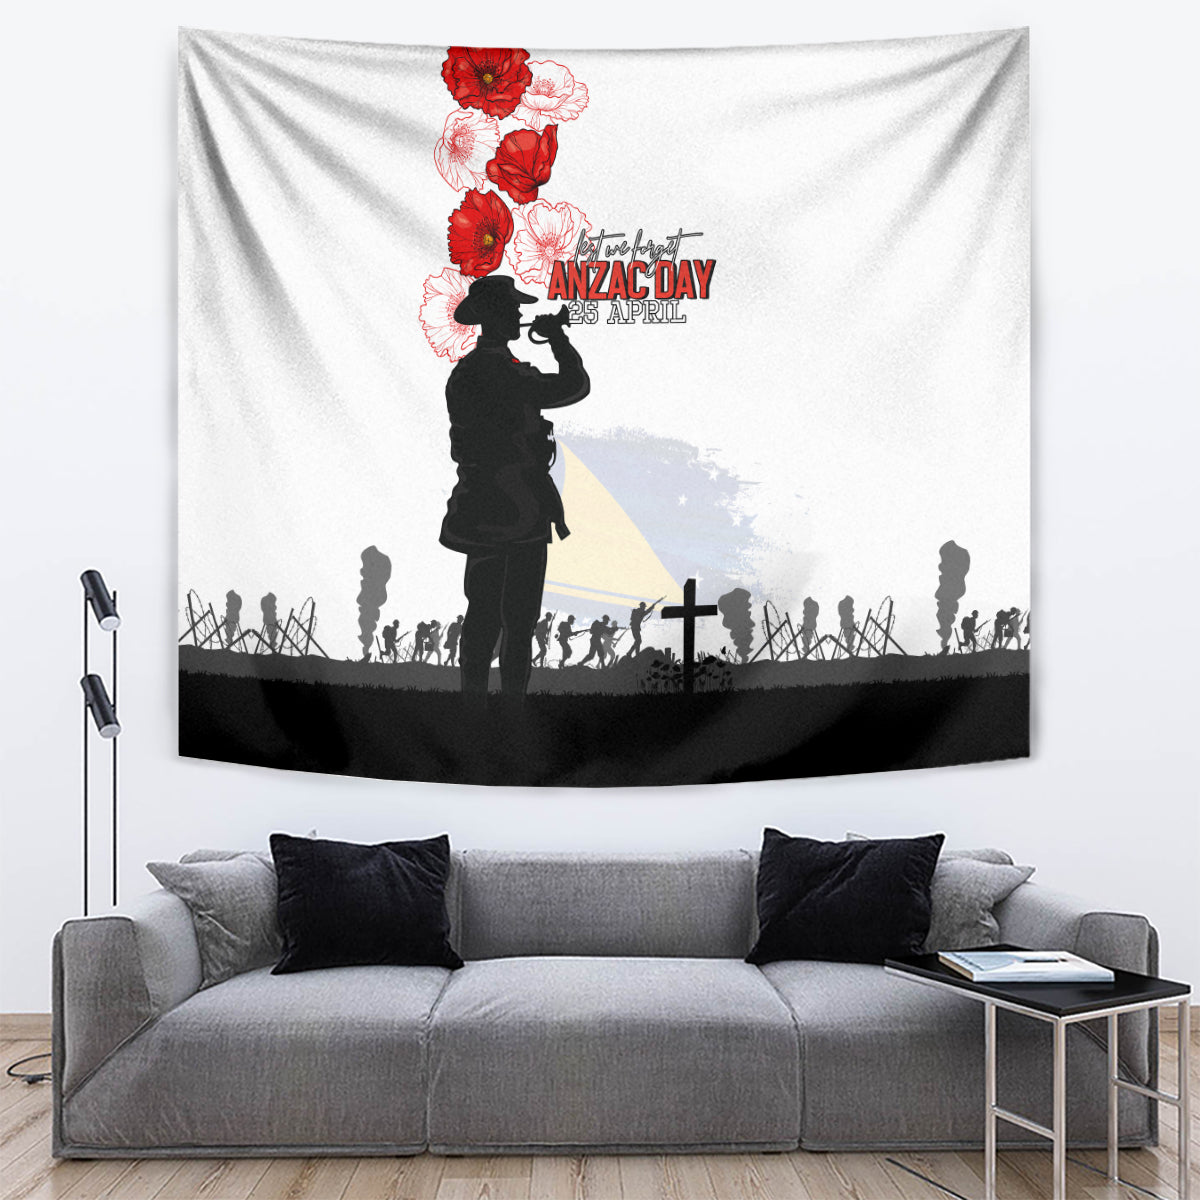 Tokelau ANZAC Day Tapestry Lest We Forget Red Poppy Flowers and Soldier LT03 White - Polynesian Pride